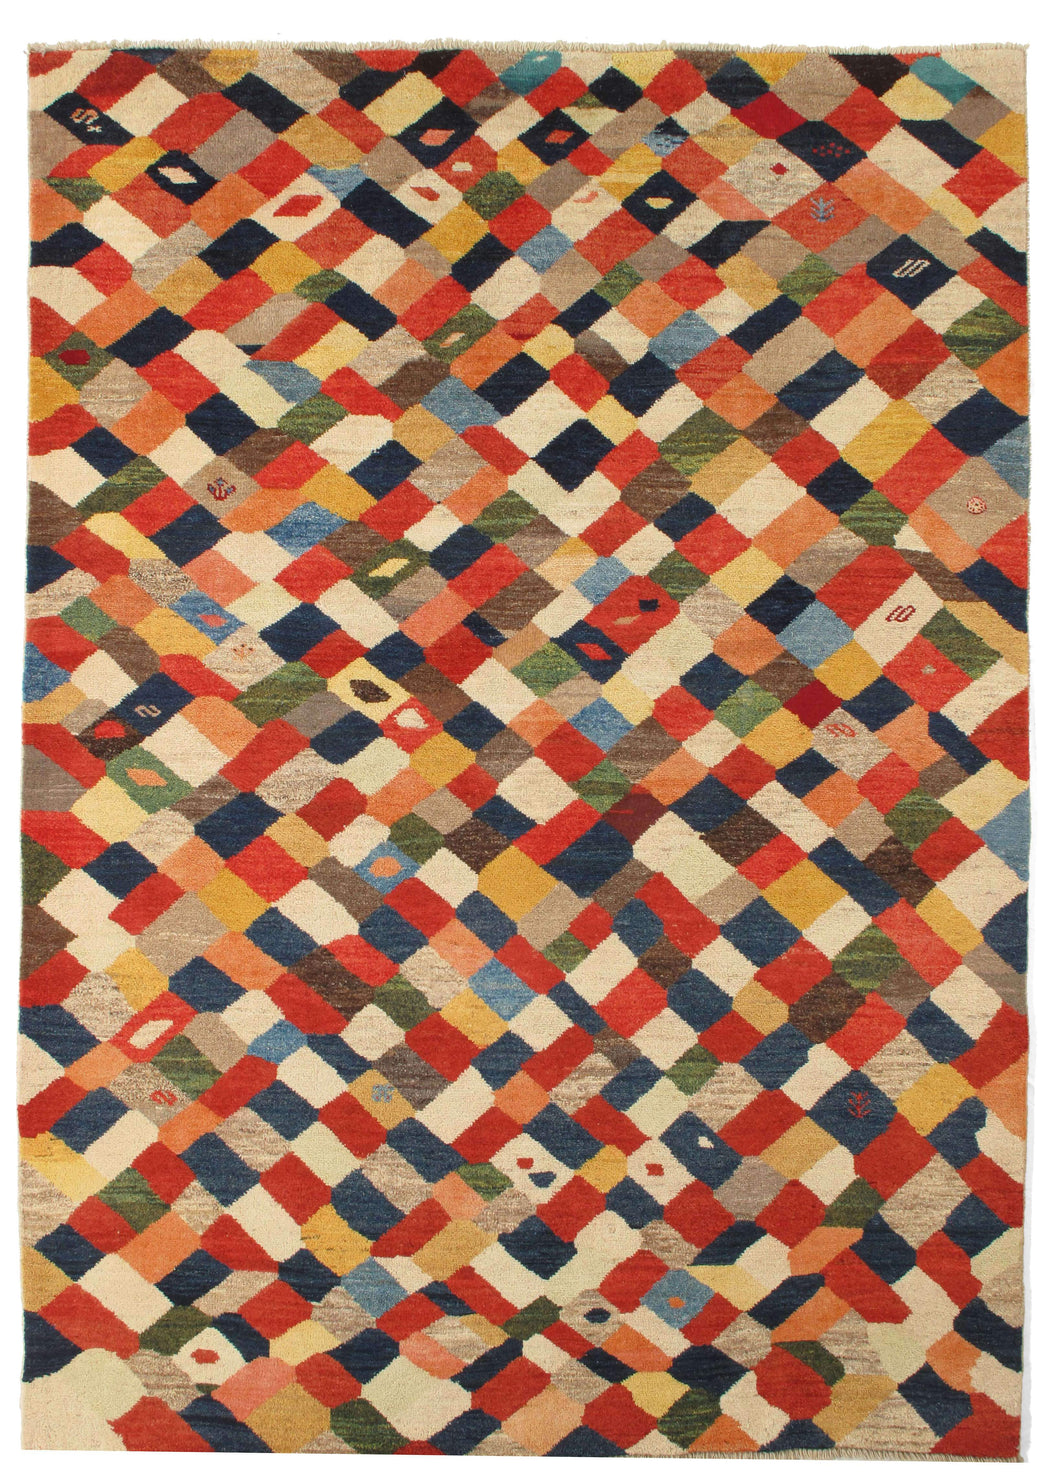 Contemporary Abstract Modern Handwoven South Persian Lori Gabbeh Rug with rainbow lattice like design